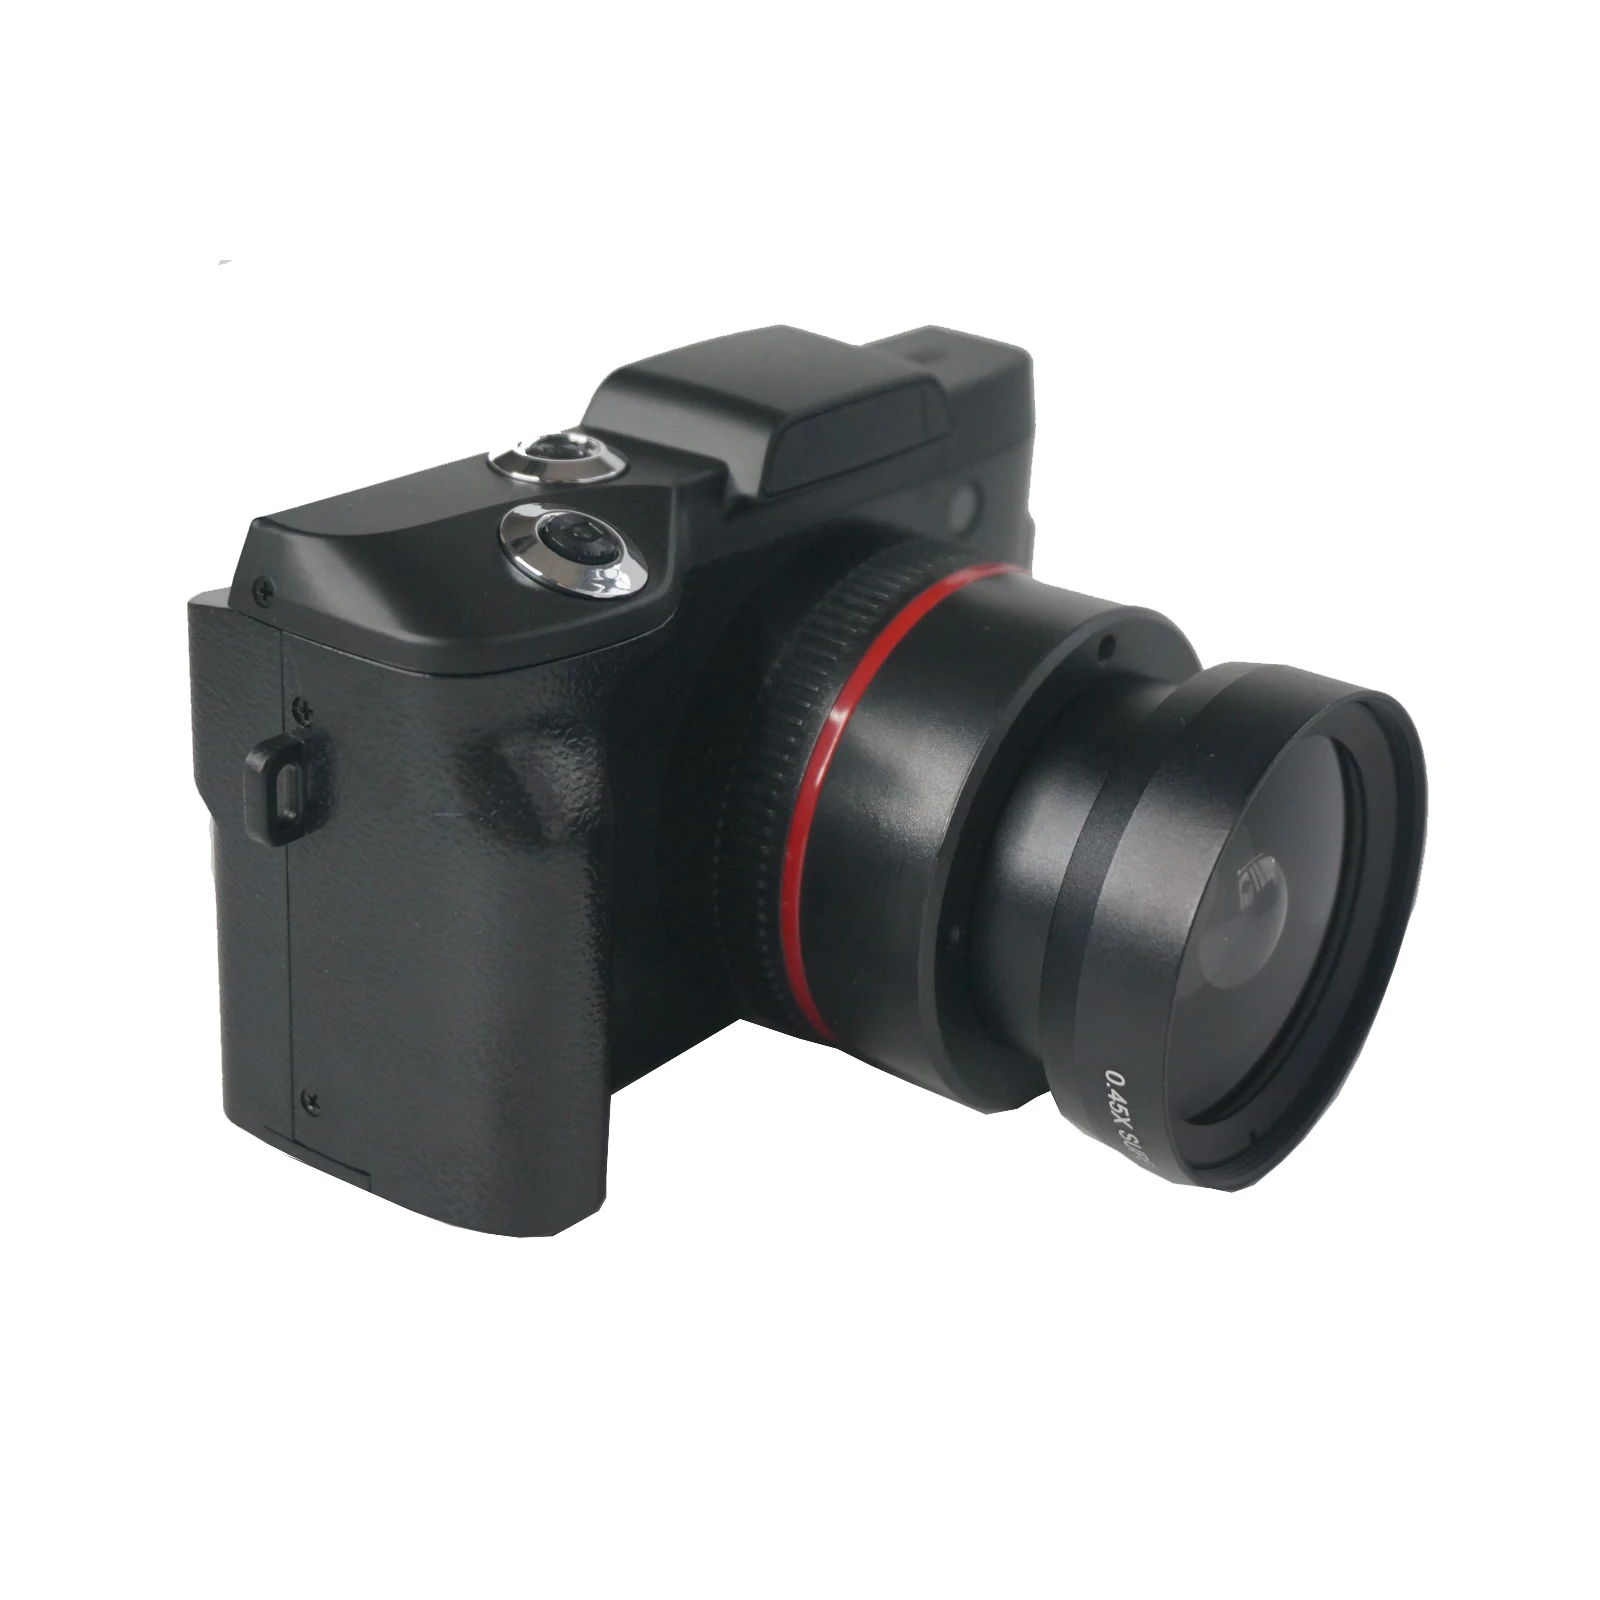 

Winait 16MP cheap promitional gift DSLR style digital videoc camera with 2.4'' TFT display and wide angle lens